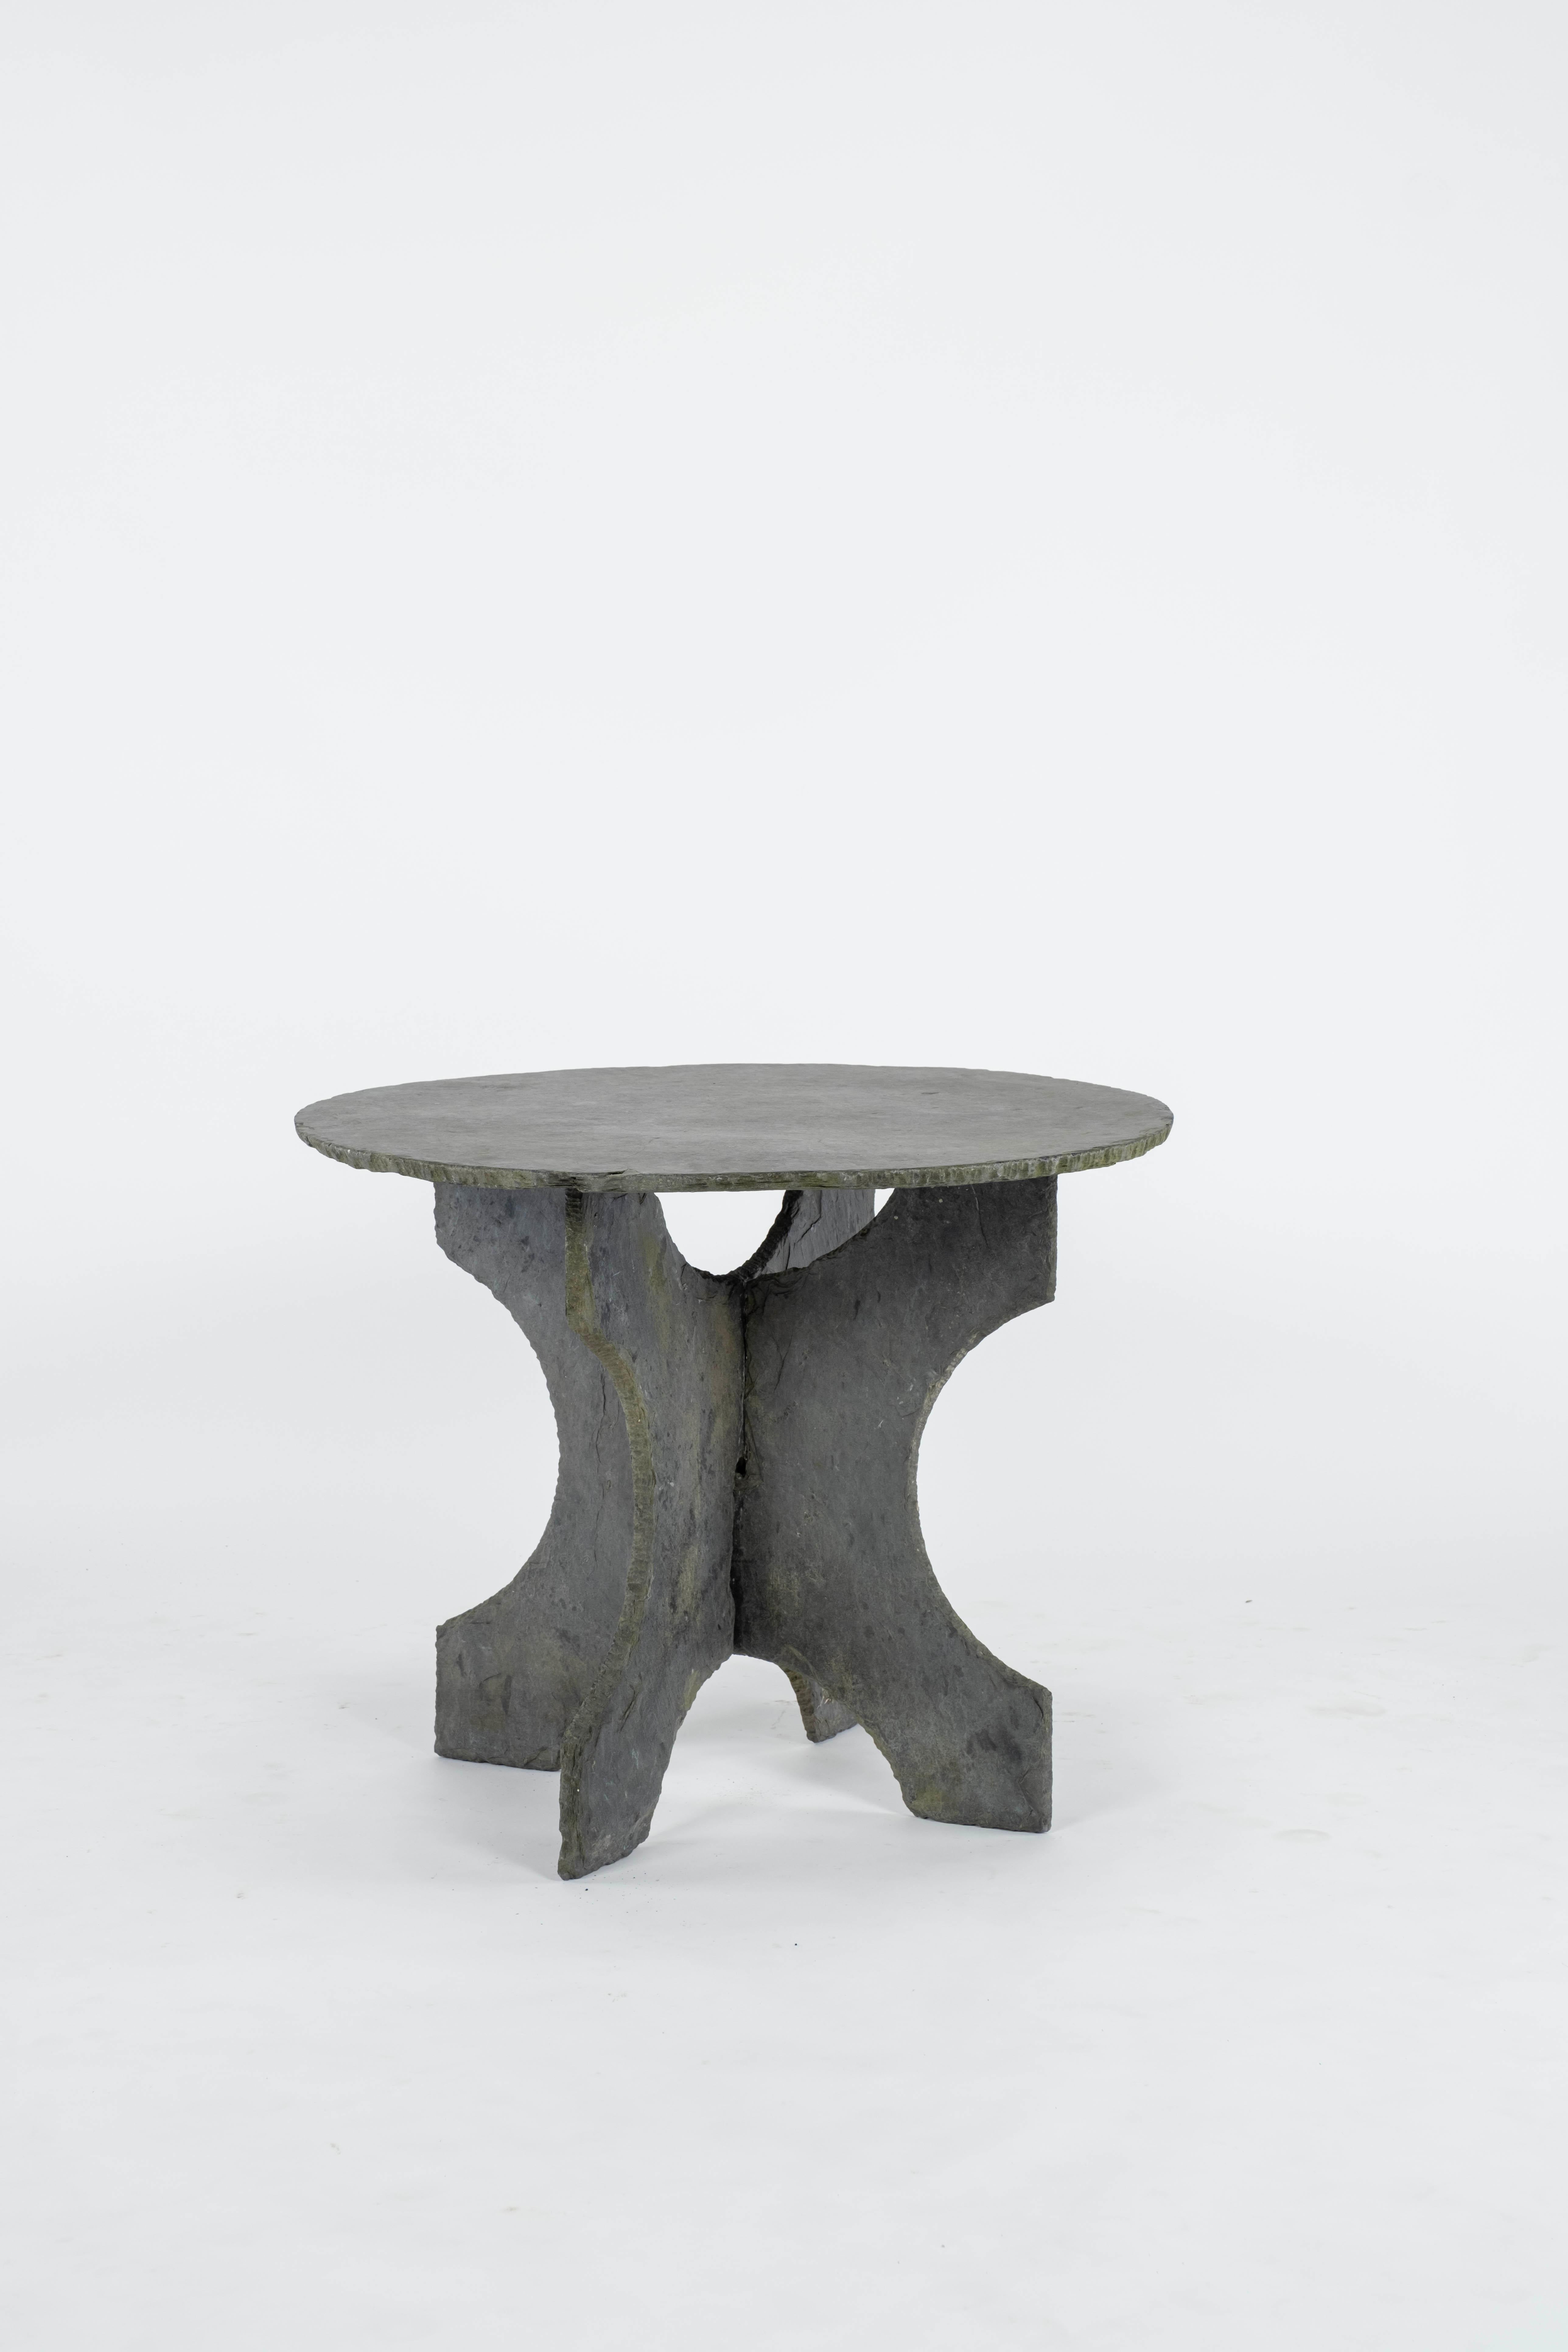 A vintage round slate table with a base that is made up of two interlocking pieces. These pieces come from the Ardennes area of France.